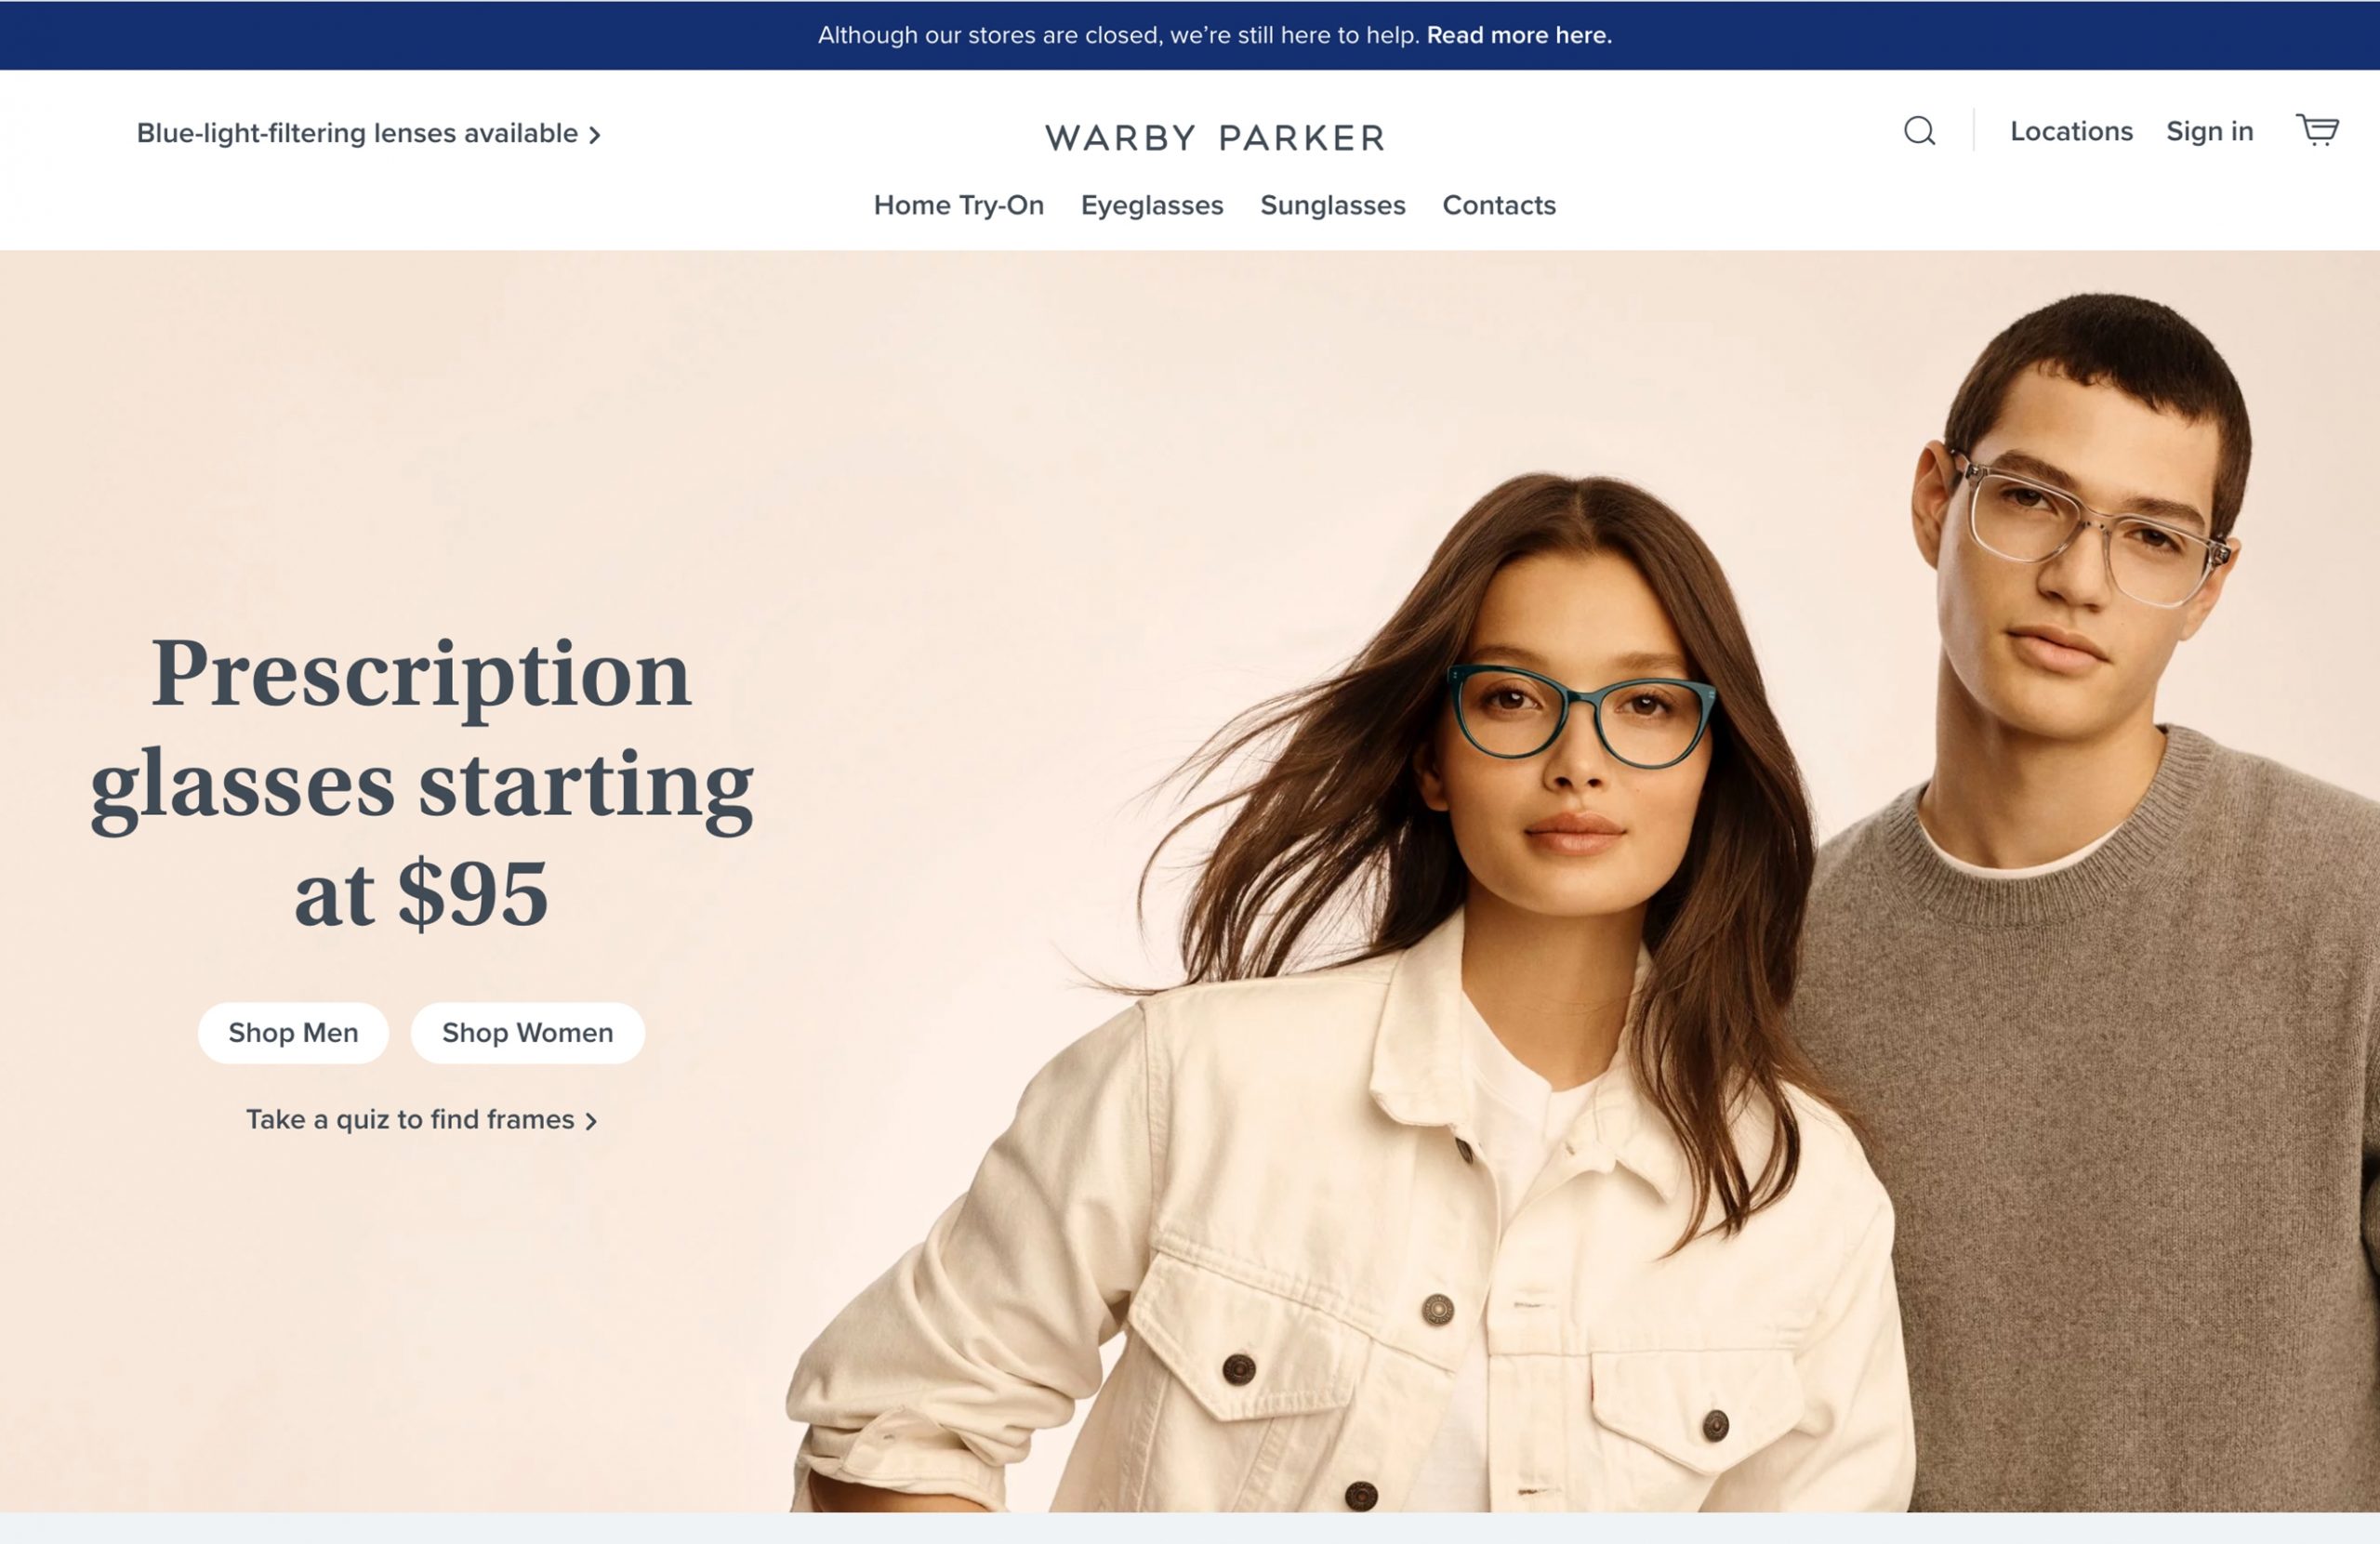 Using Interactive Web Design to Connect with B2B Clients During Social Distancing